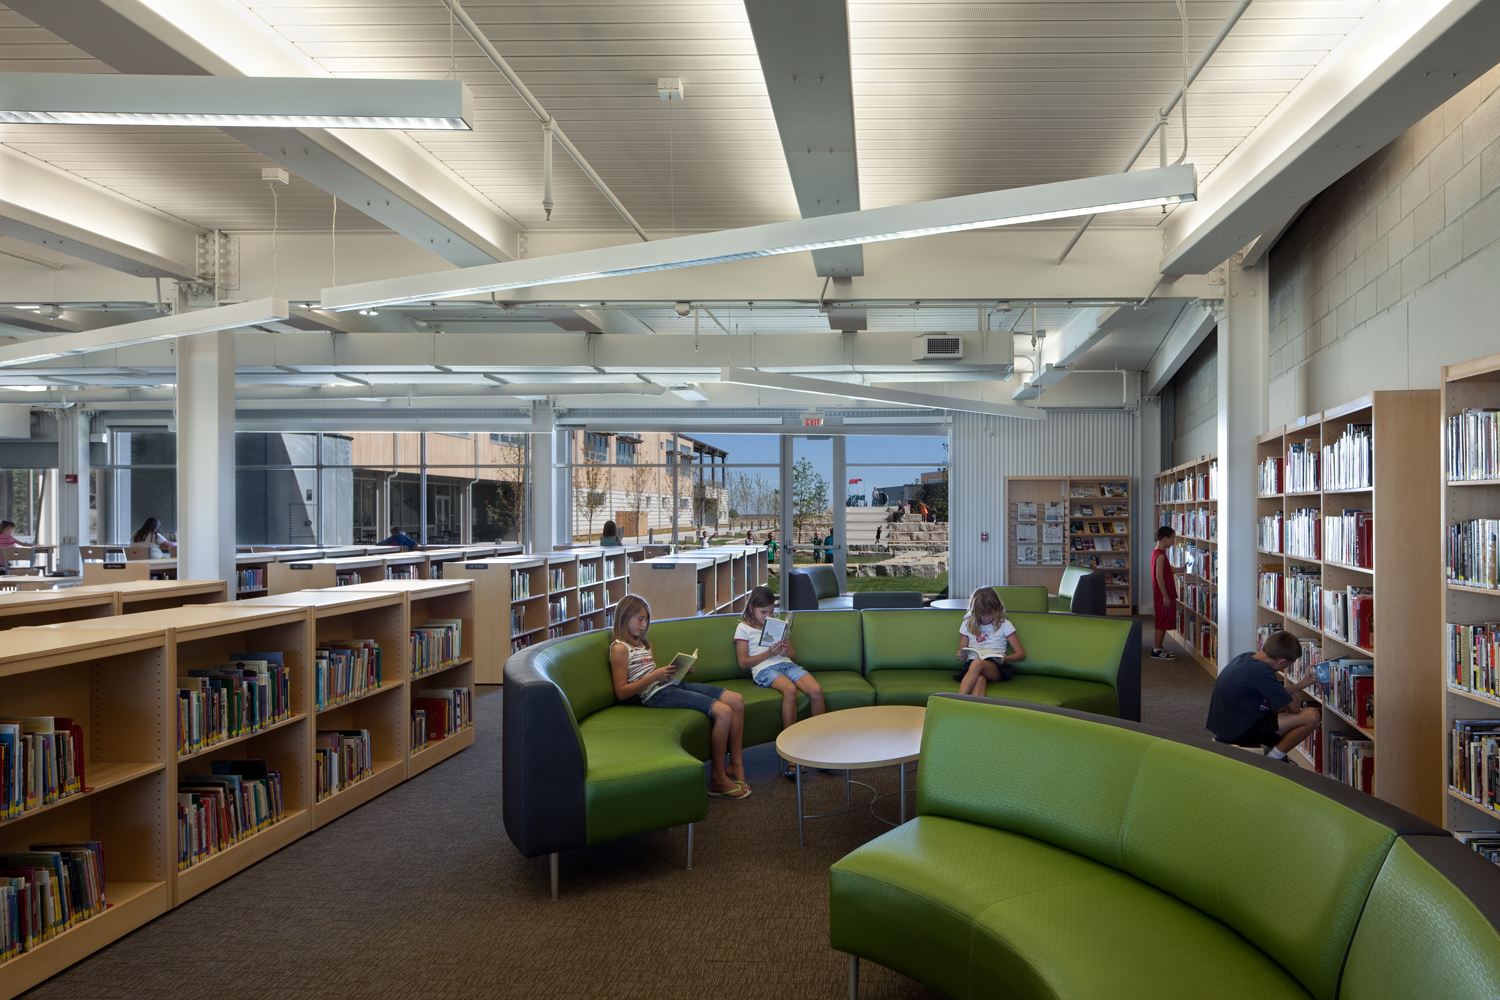 Inside the library at Greensburg School, built by McCownGordon